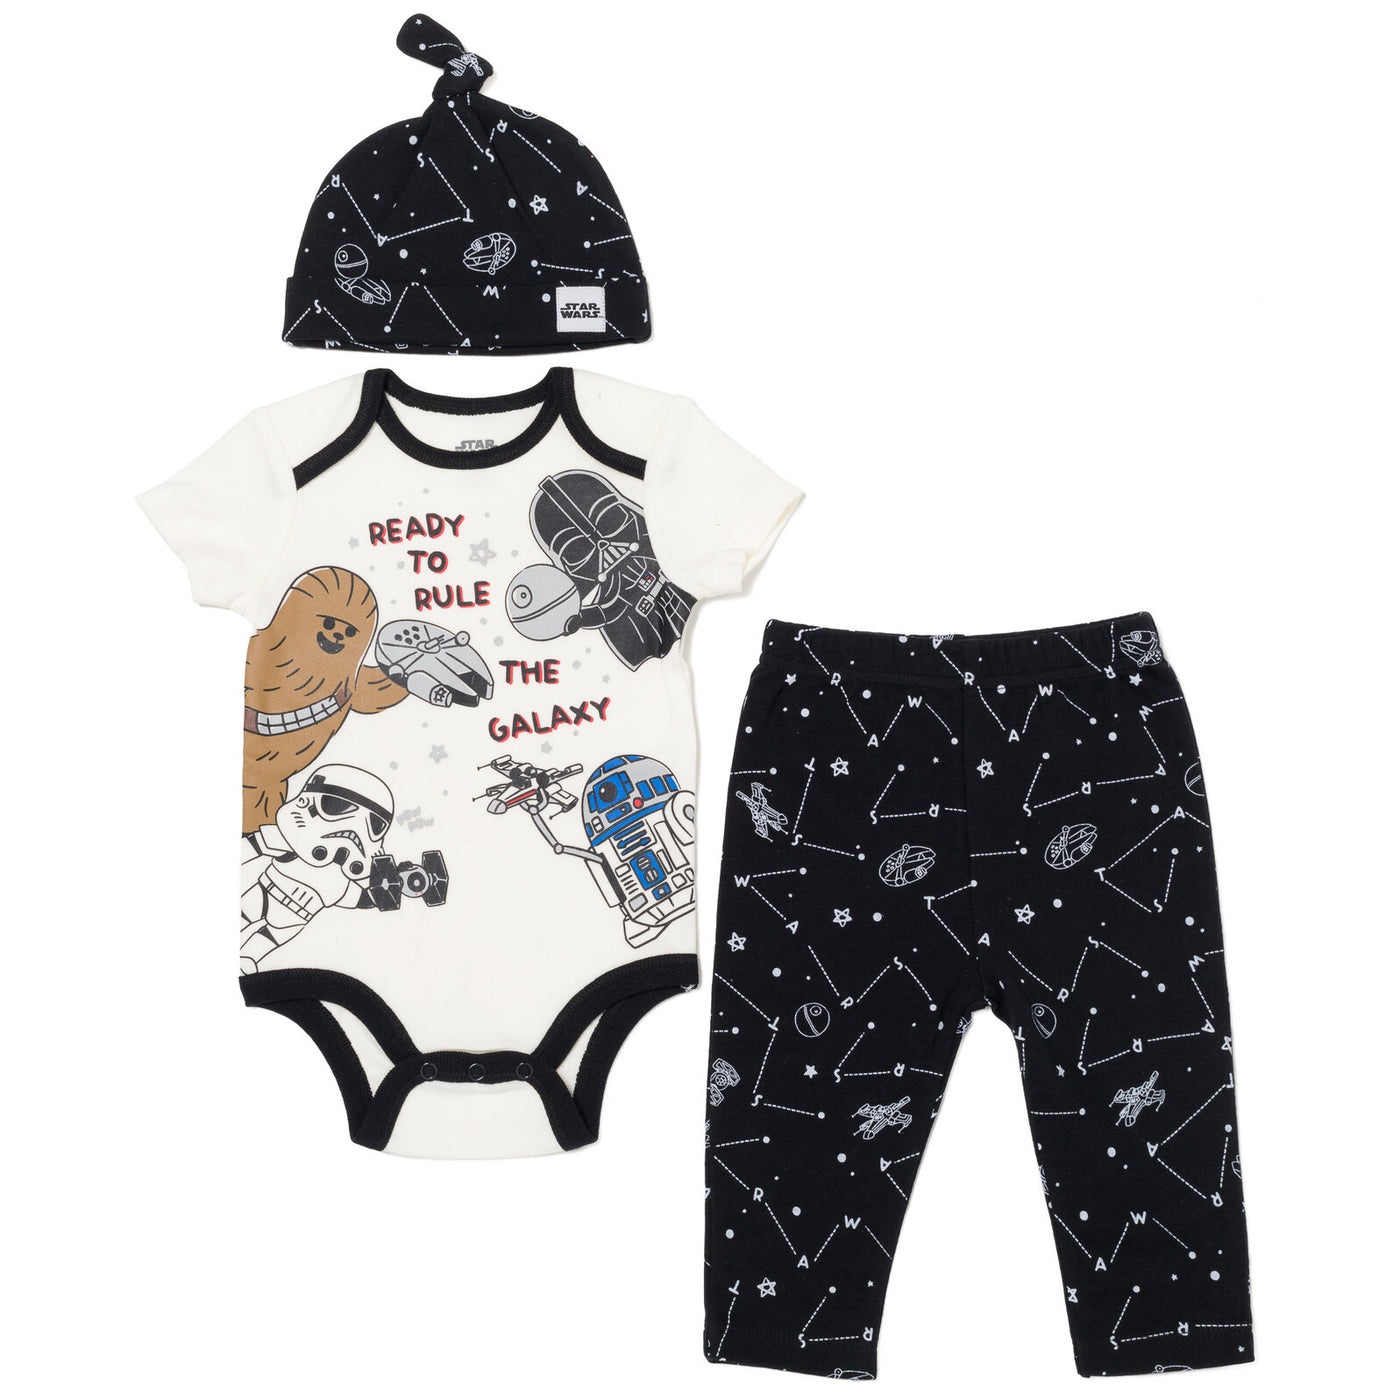 STAR WARS Bodysuit Pants and Hat 3 Piece Outfit Set